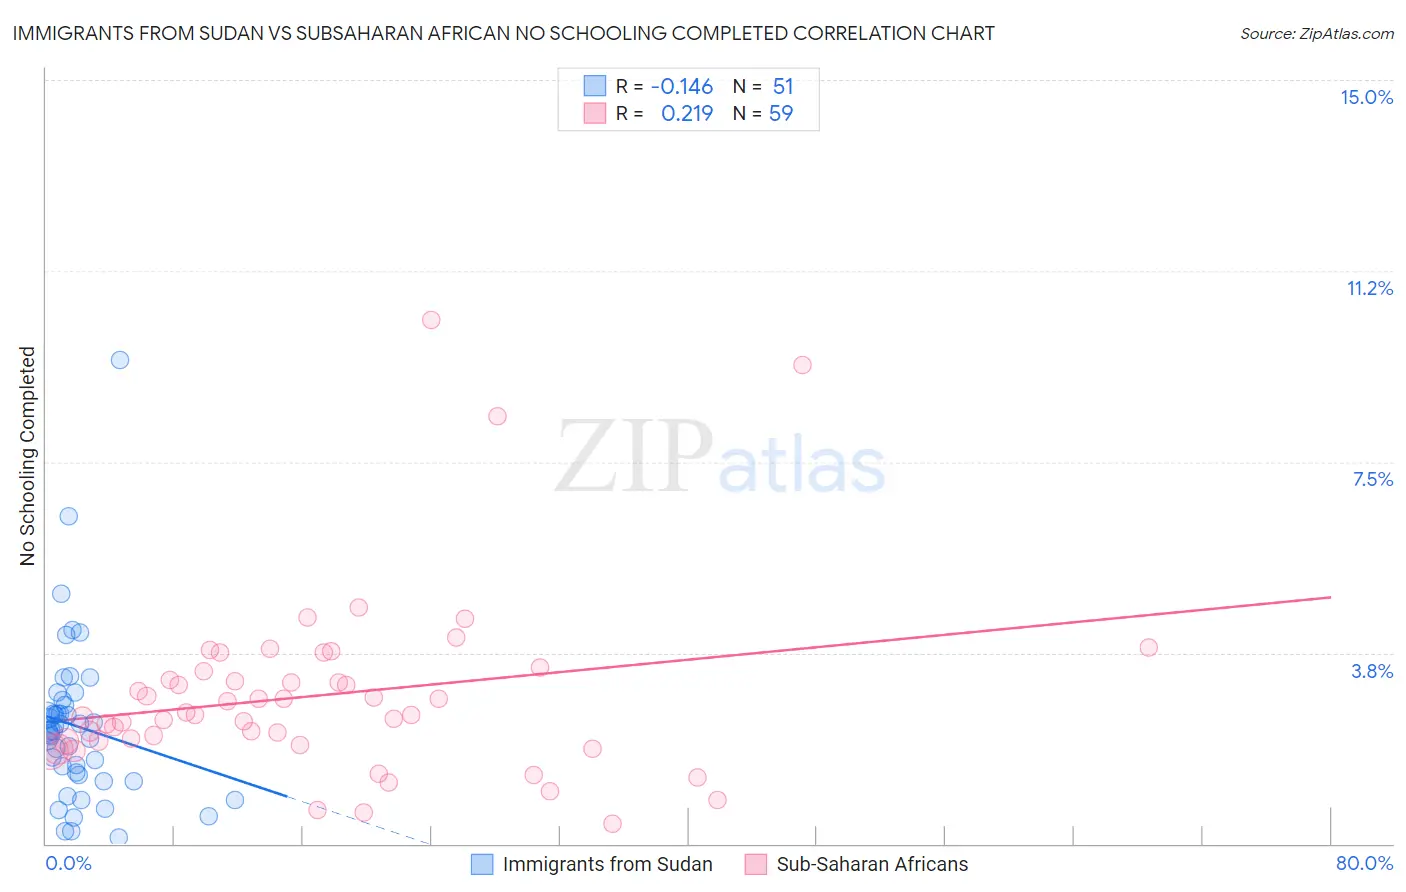 Immigrants from Sudan vs Subsaharan African No Schooling Completed